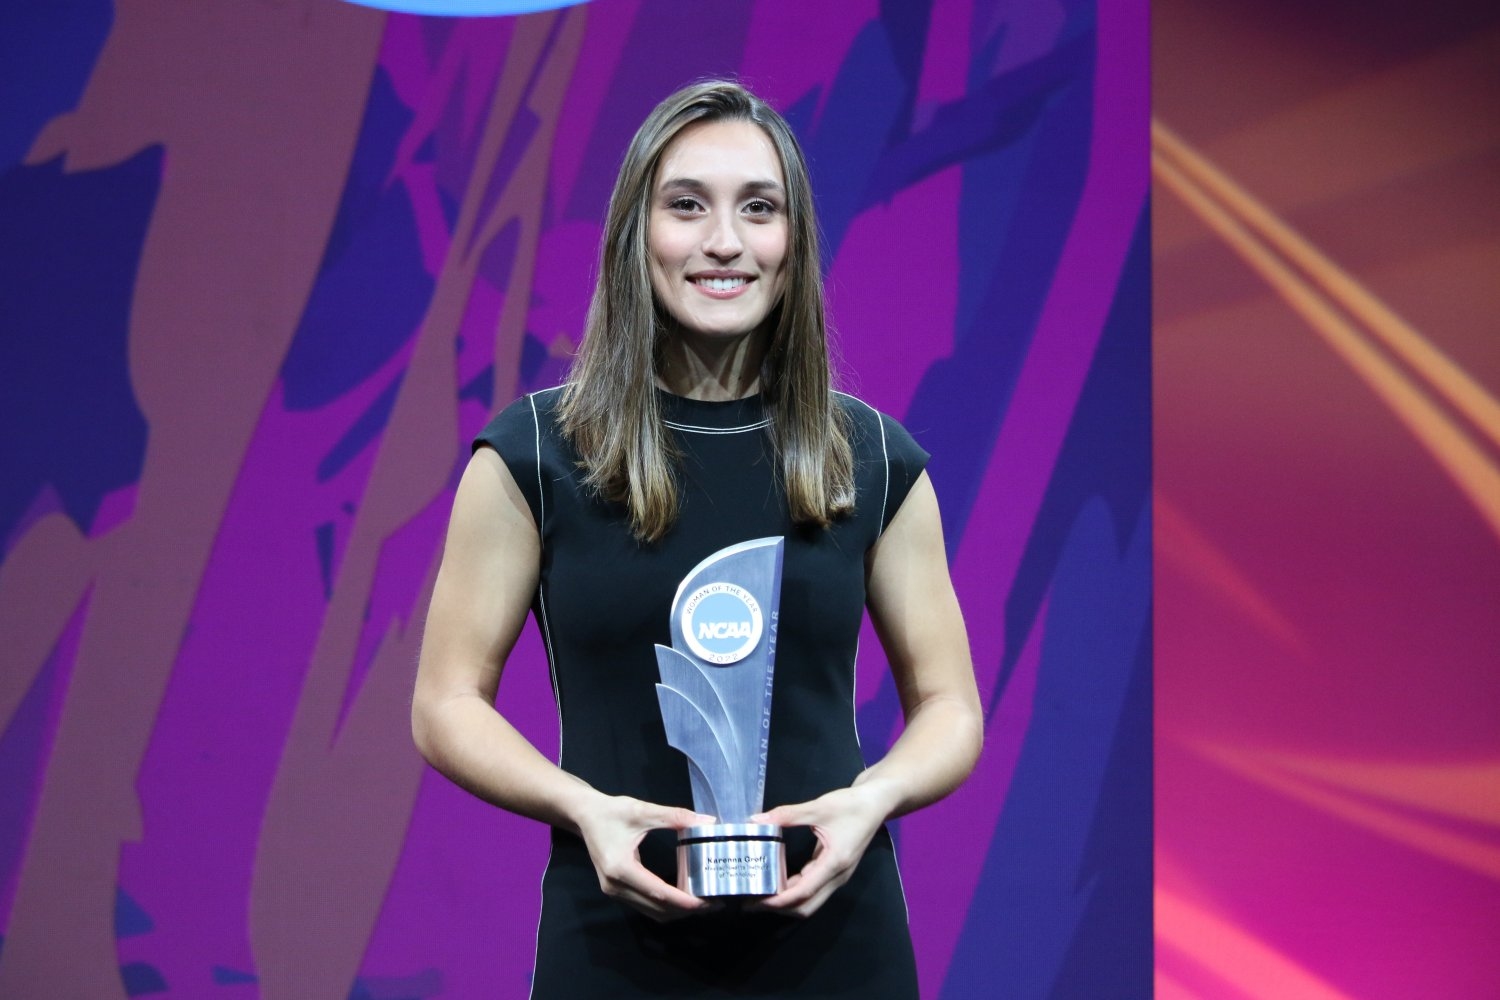 MIT Women's Soccer All-American Karenna Groff ’22 receives the NCAA Woman of the Year award at the NCAA Convention in San Antonio, Texas.